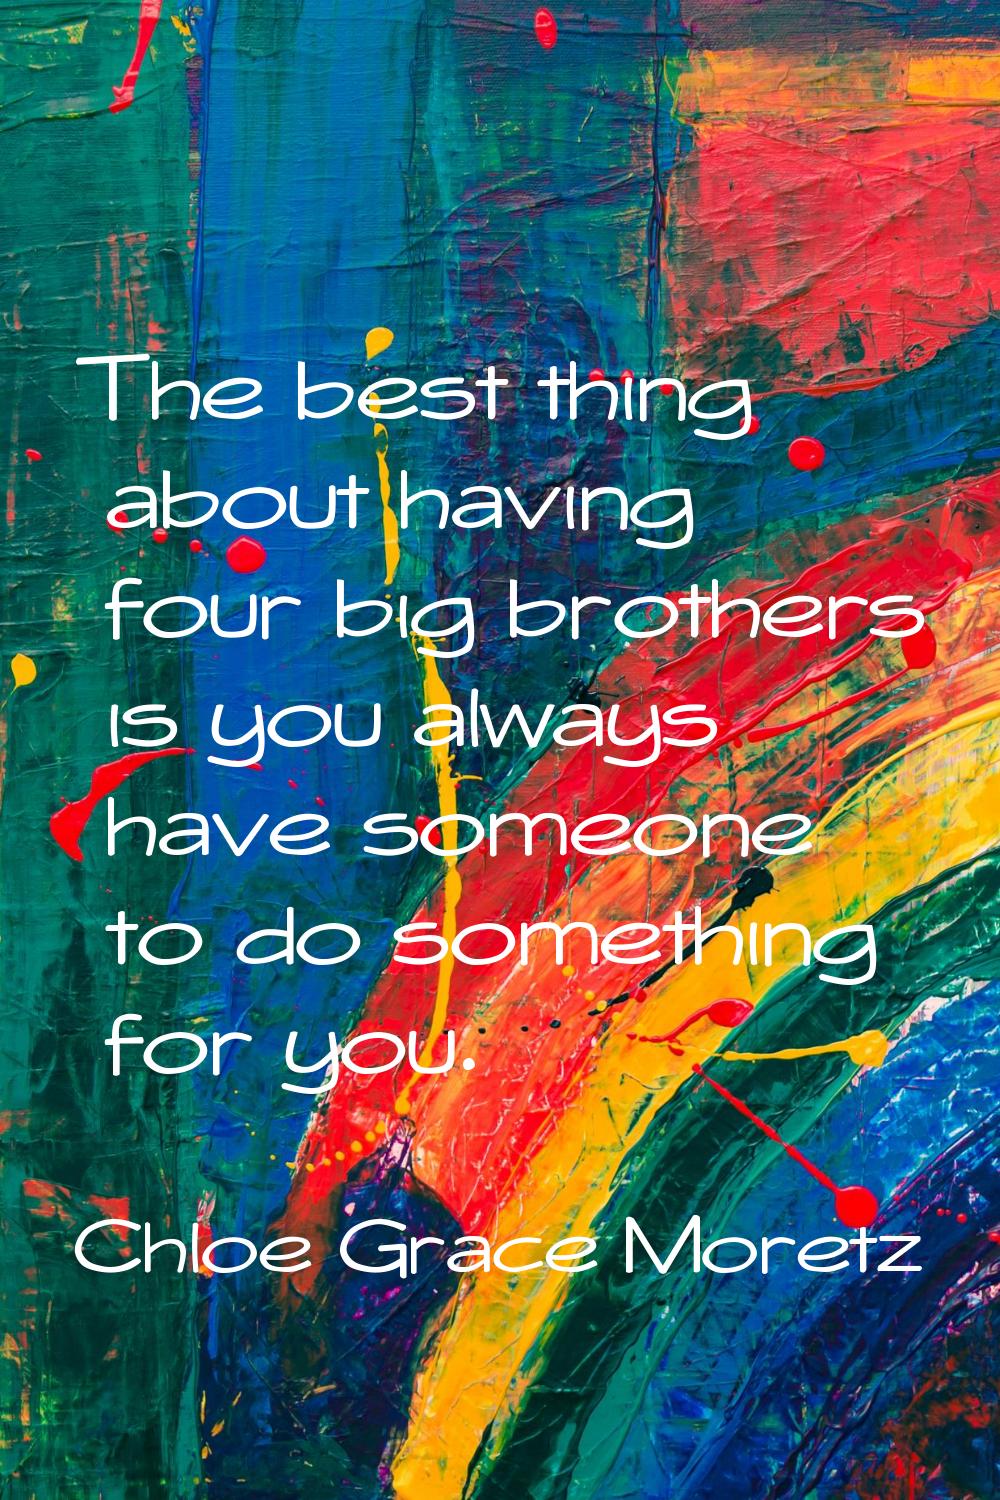 The best thing about having four big brothers is you always have someone to do something for you.